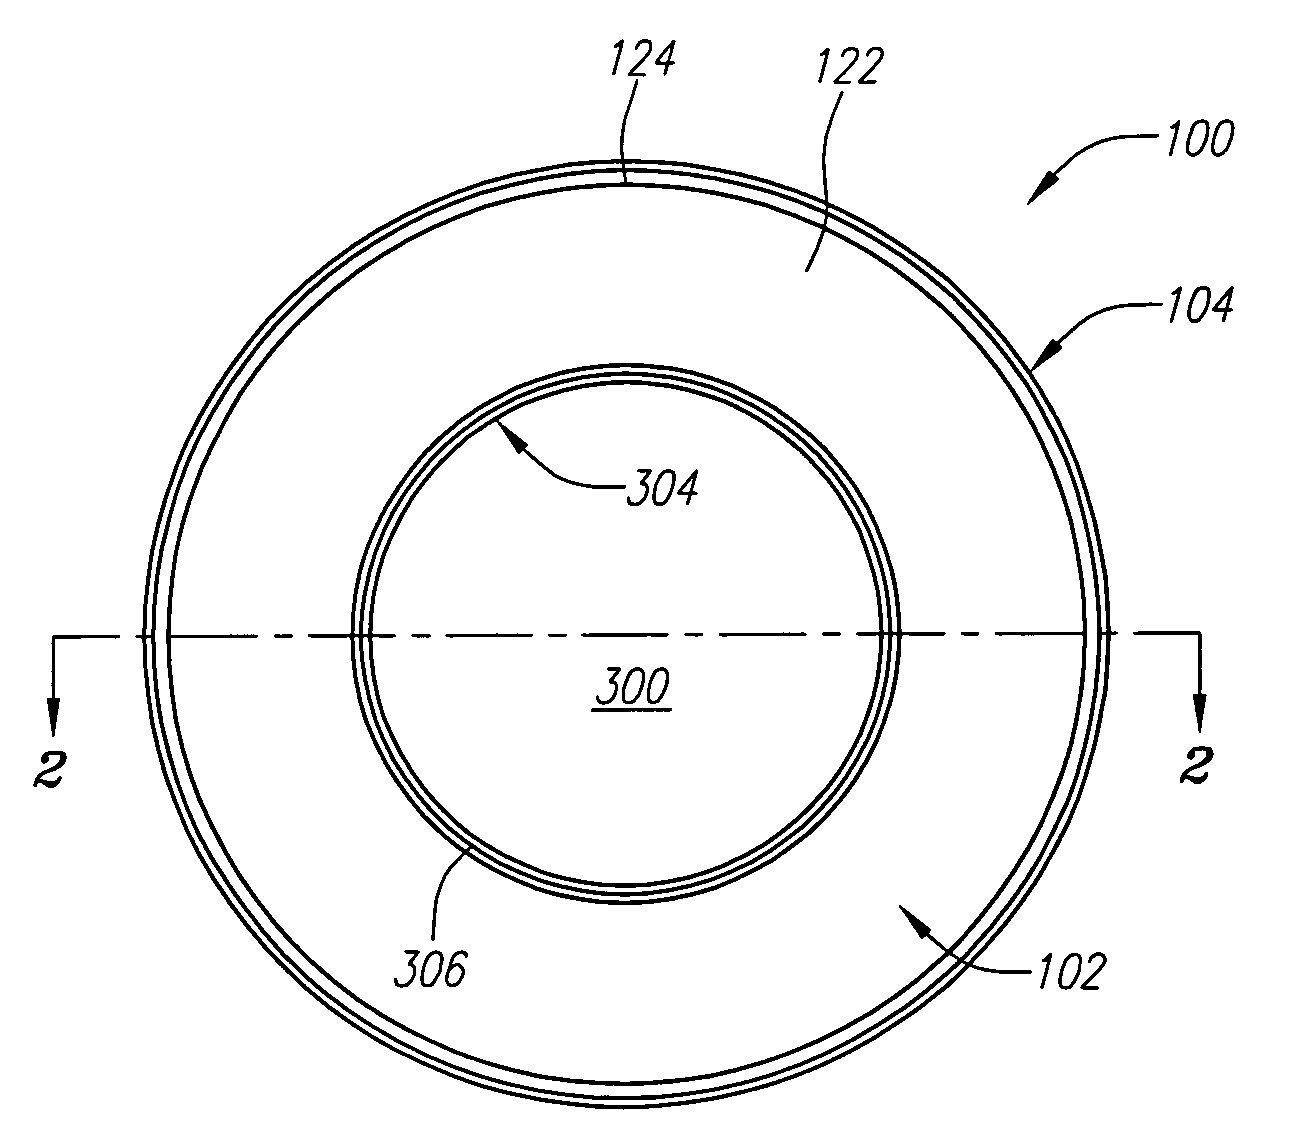 Implantable lenses with modified edge regions